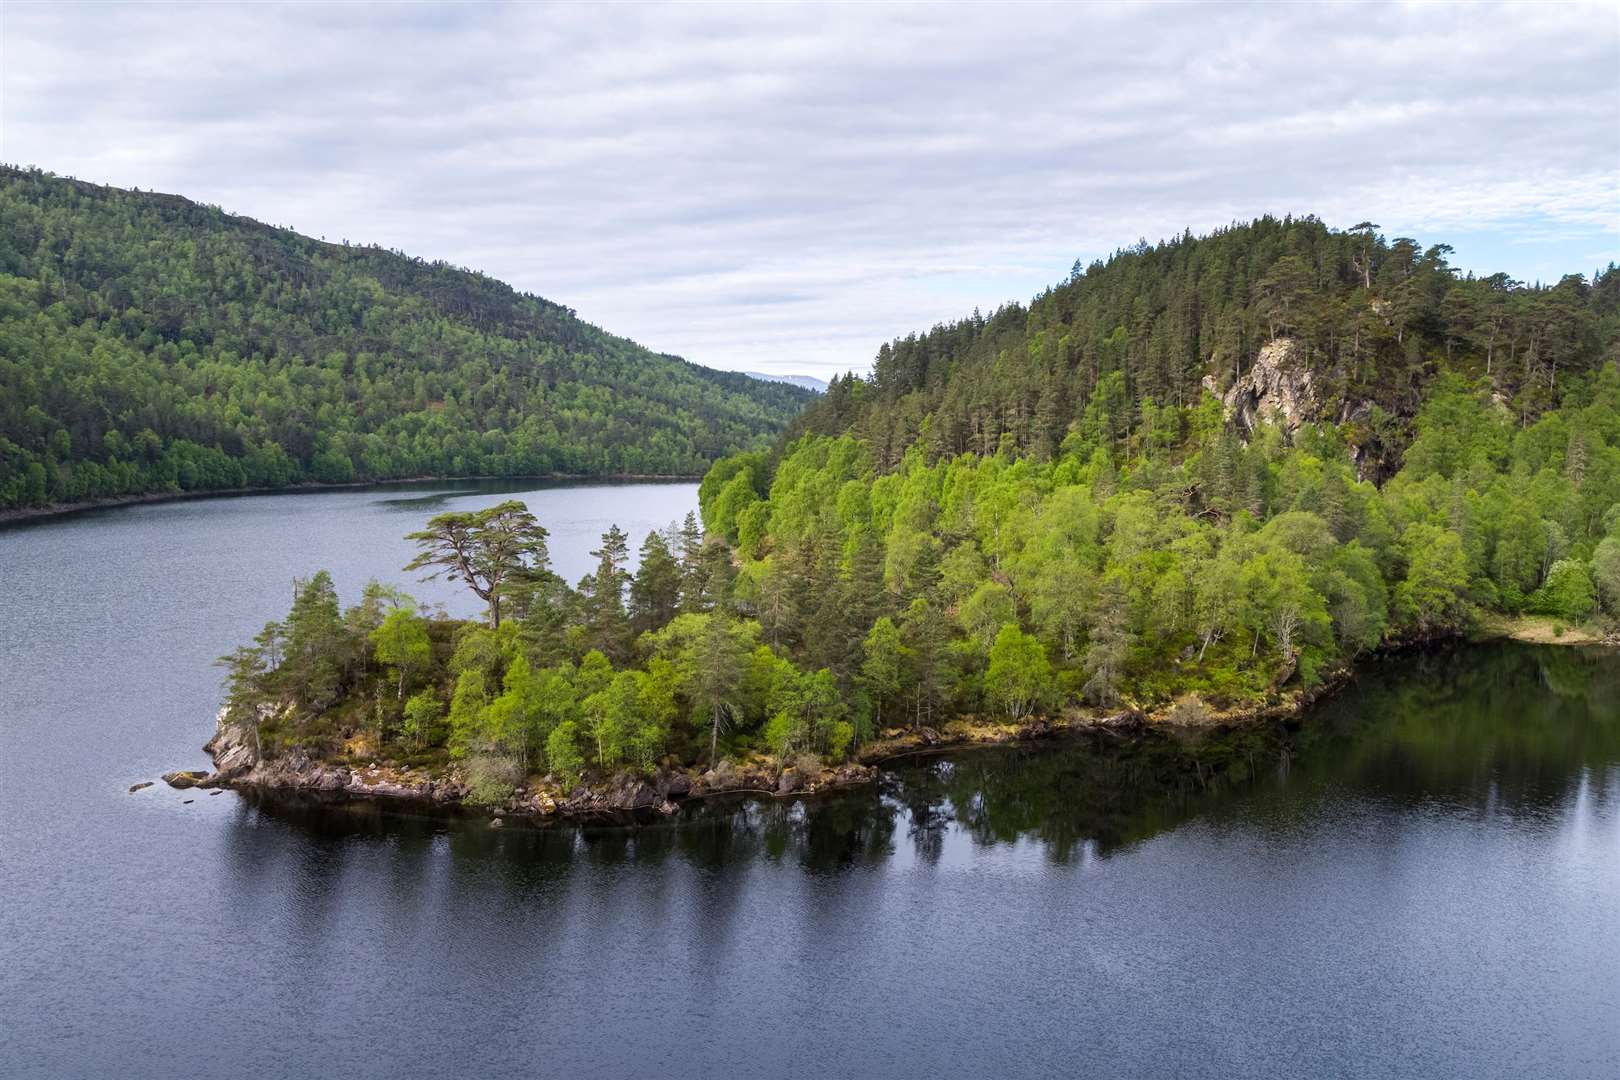 Caledonian forest surrounding Loch Beinn a Mheadhoin in Glen Affric National Nature Reserve, Scotland..